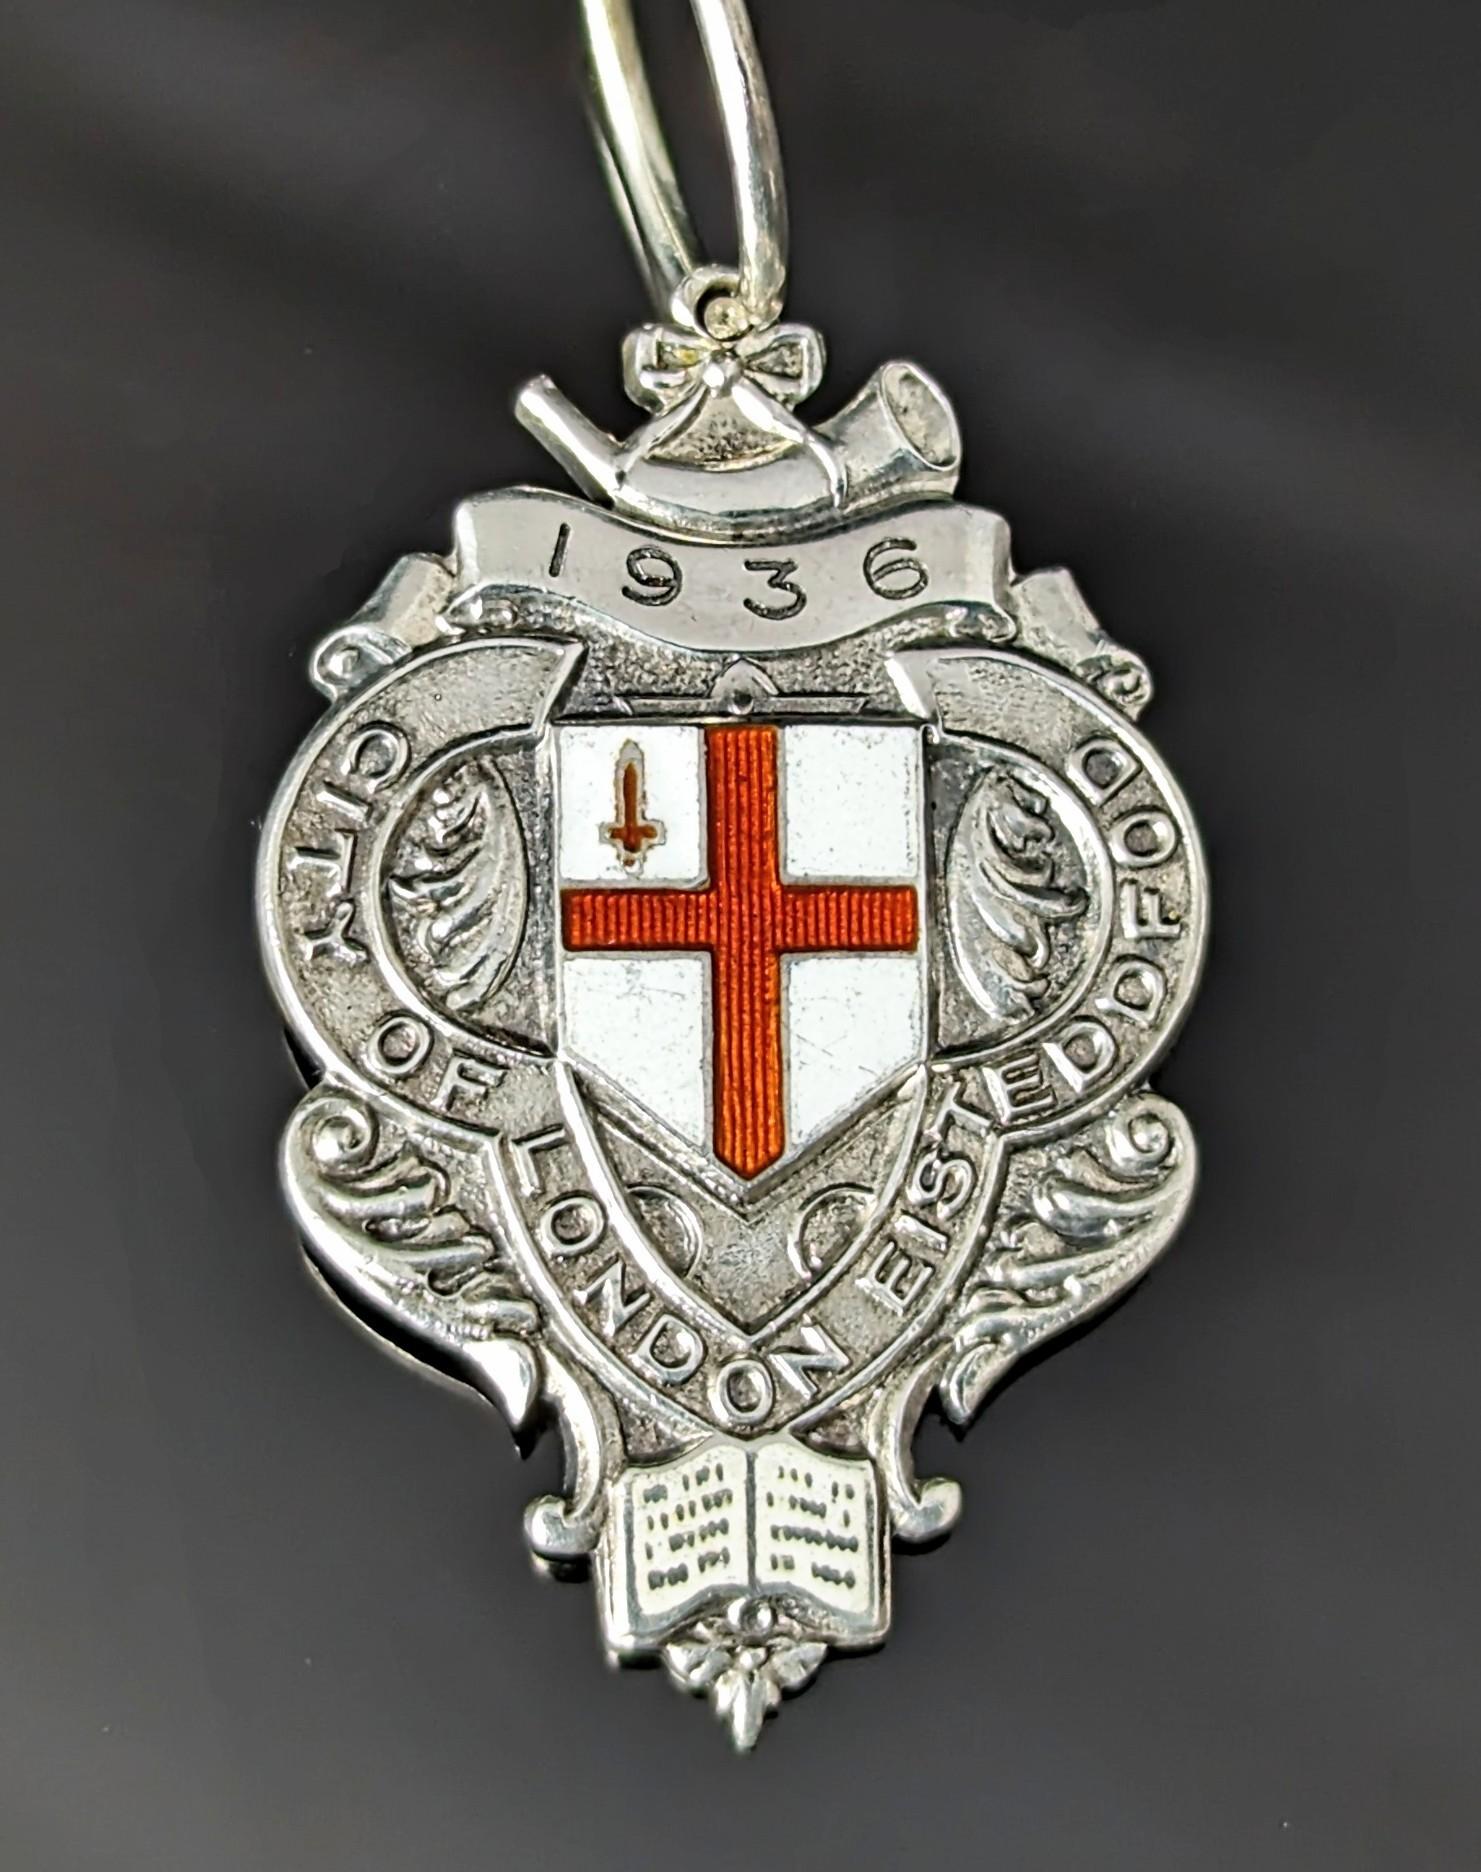 An attractive vintage sterling silver and enamel fob pendant.

It is fairly large made from sterling silver and features an enamelled flag the St George Cross in a shield shape along with a small red sword.

Below this is a small enamelled open